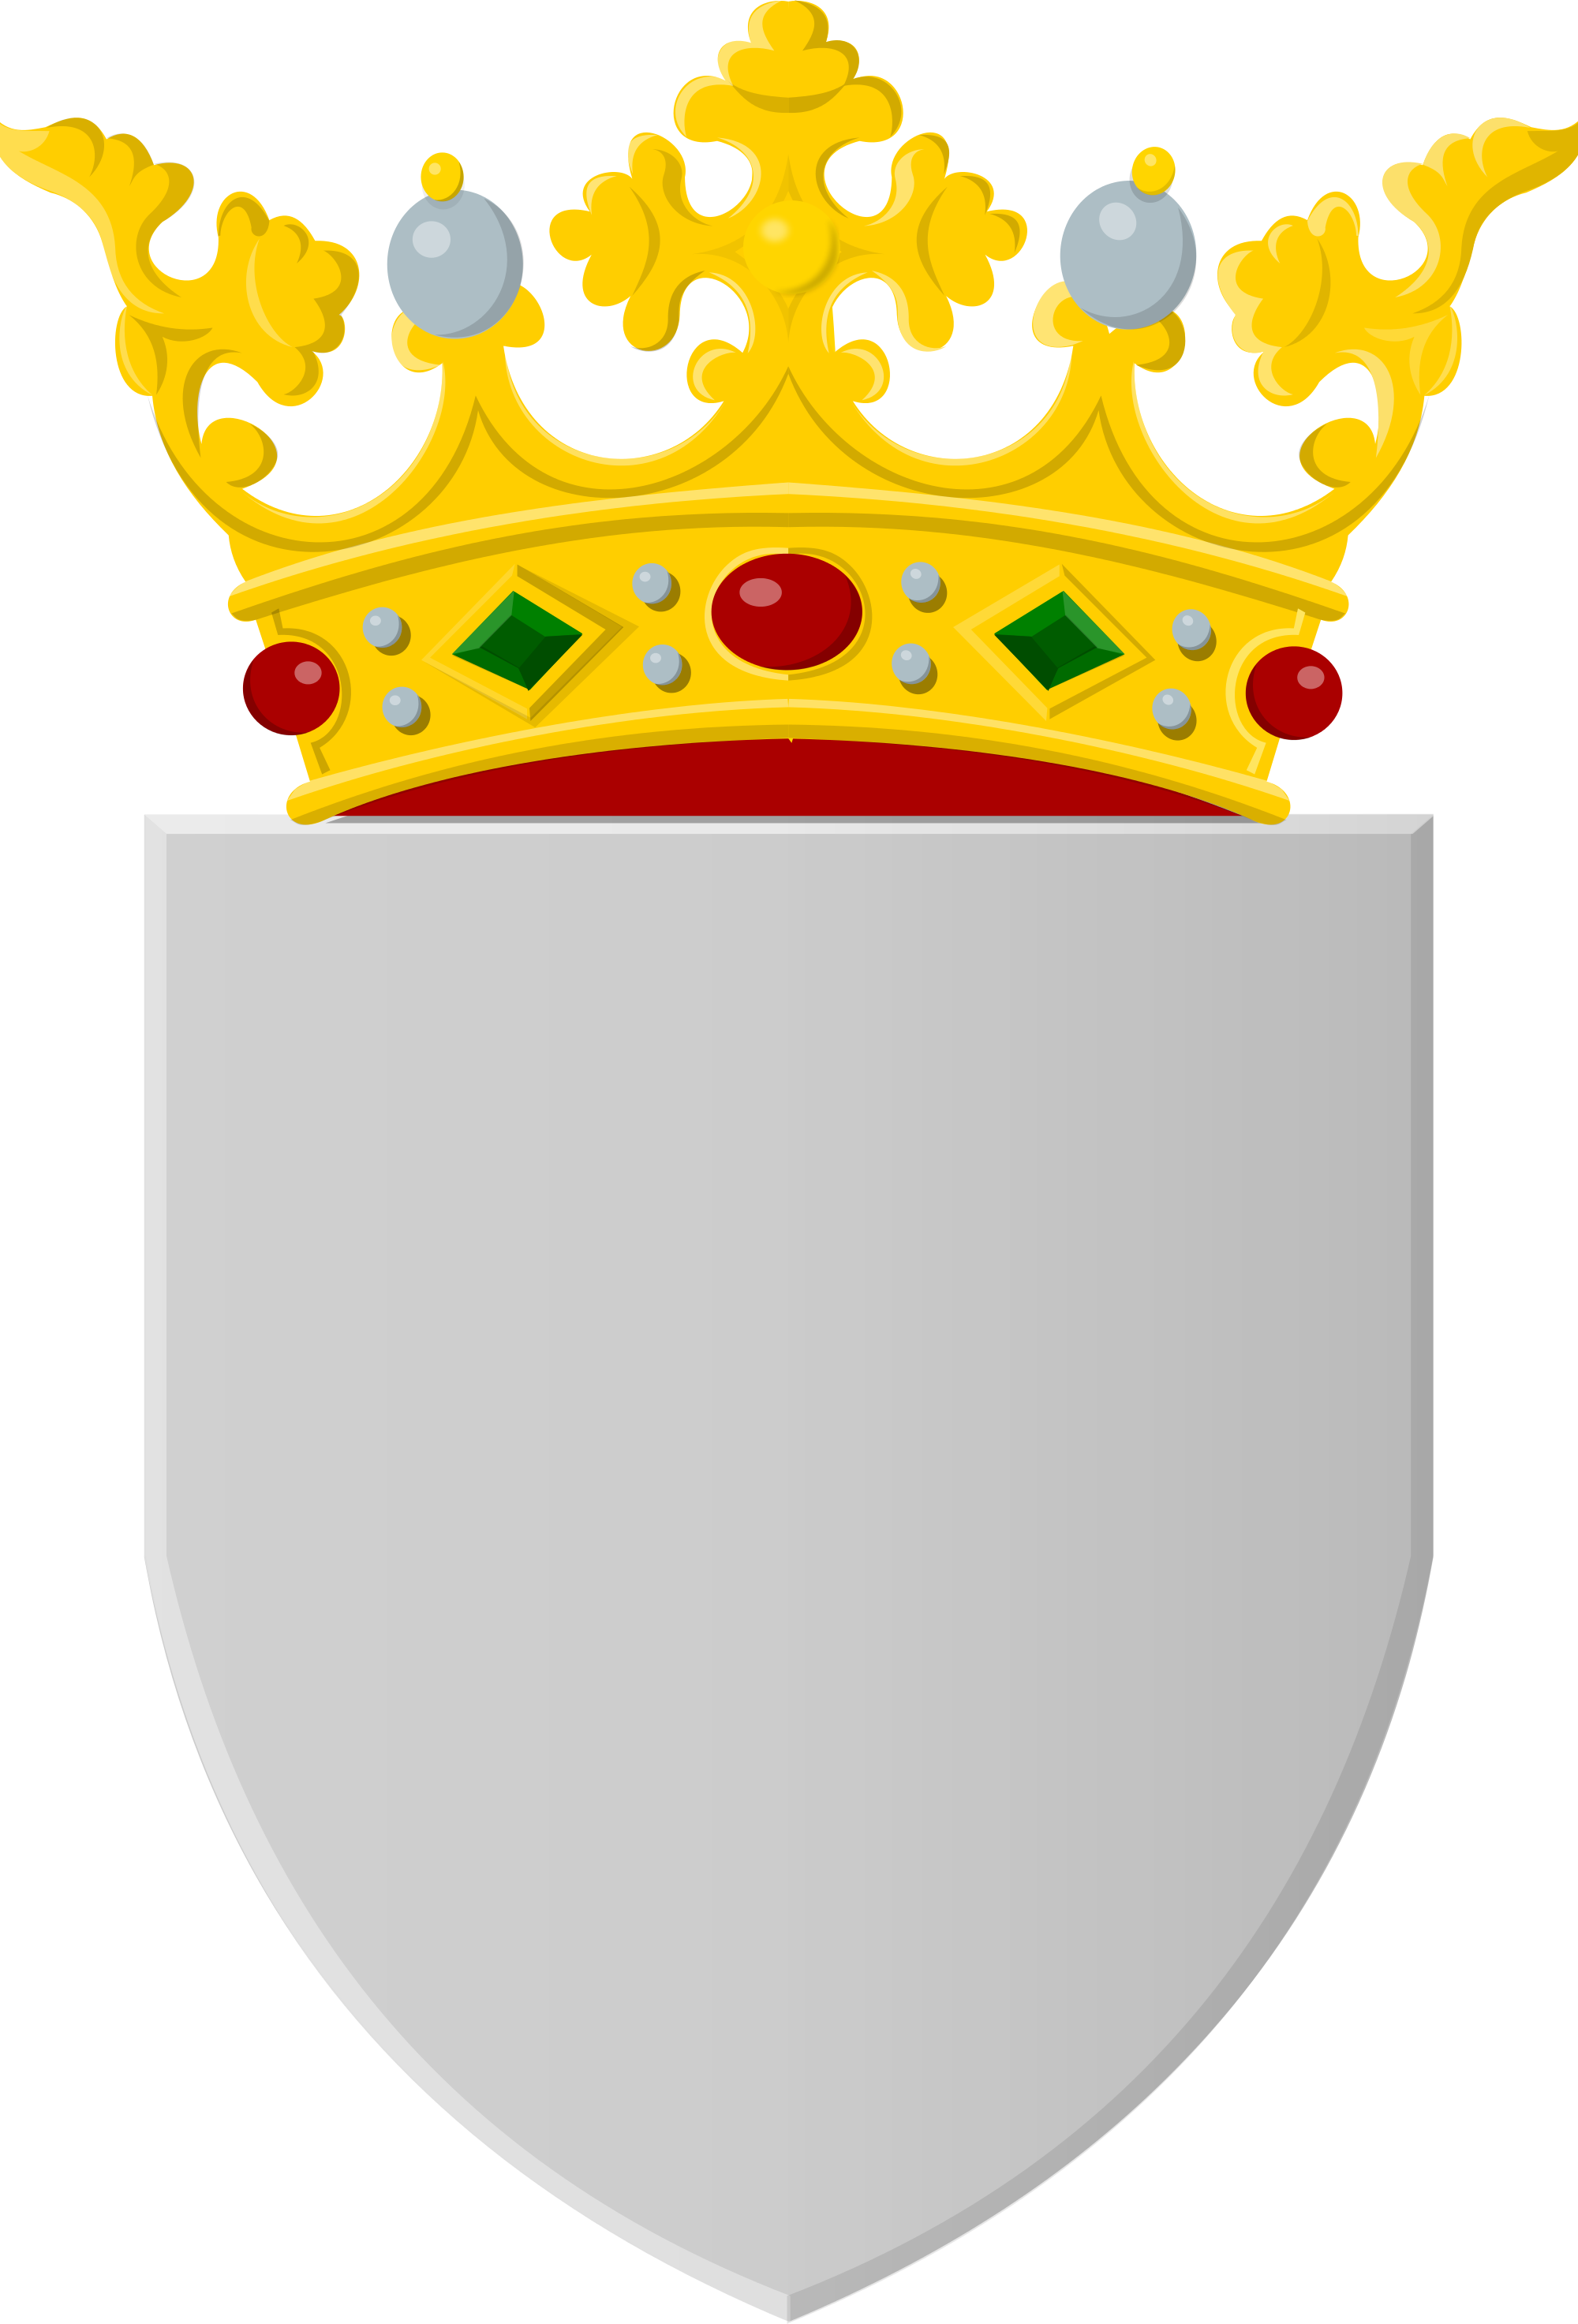 Silver Shield With Golden Crown - Shield With Crown Png (2000x2946)